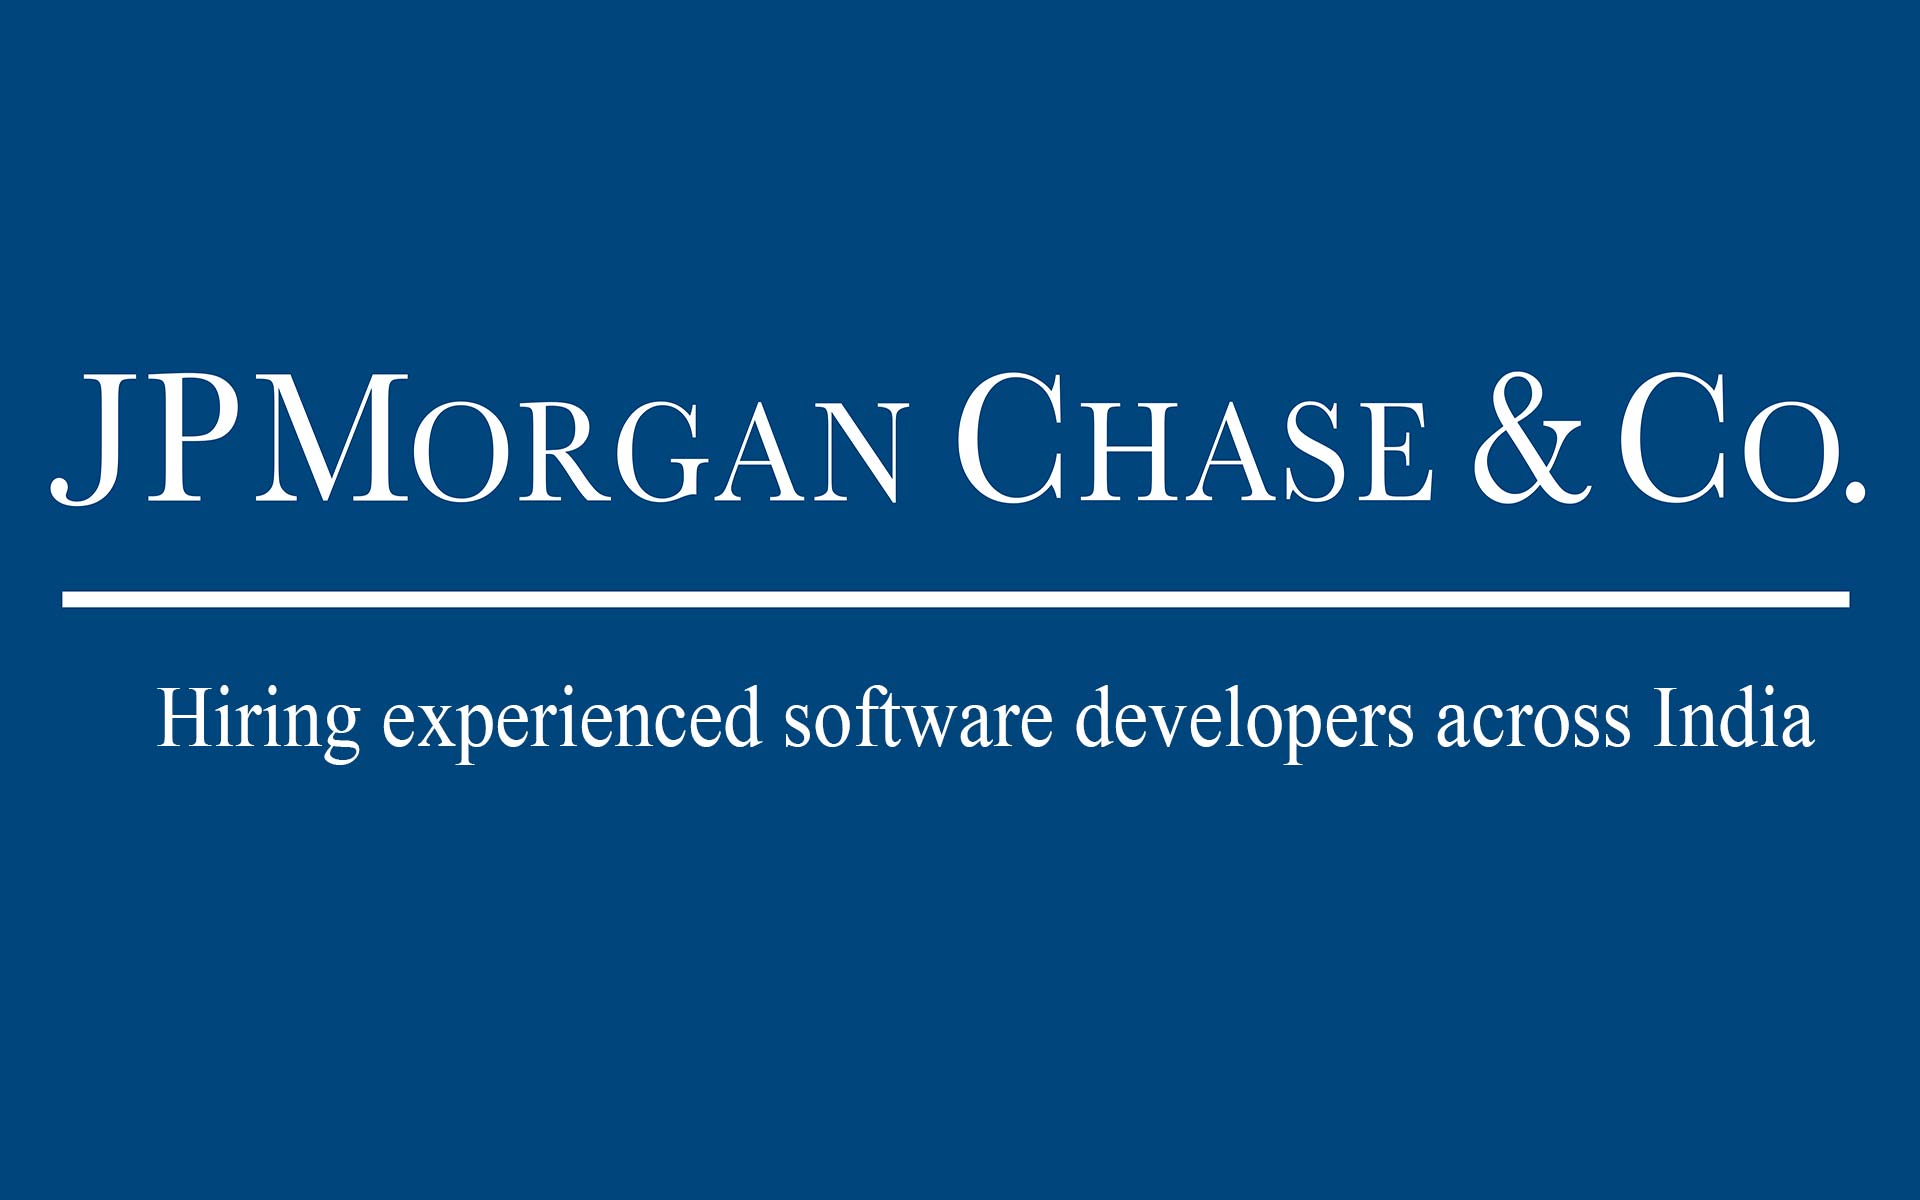 JPMorgan Chase is hiring experienced software developers across India